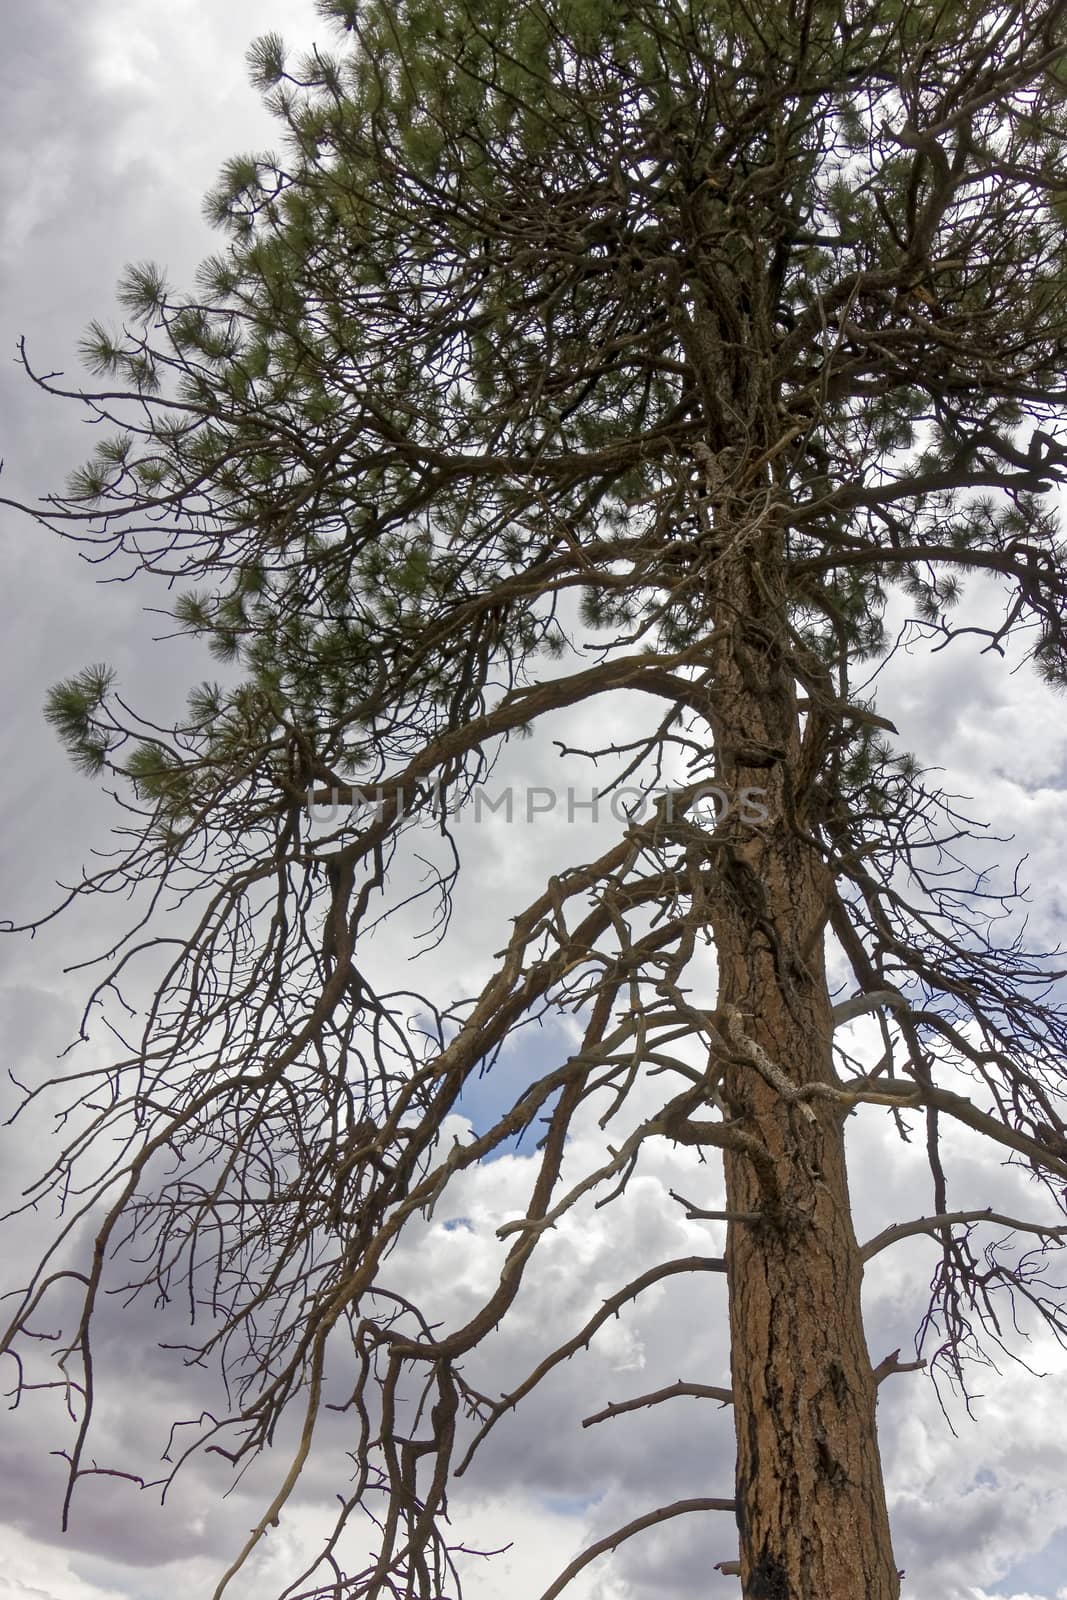 A scorched tree in the Kaibab forest.